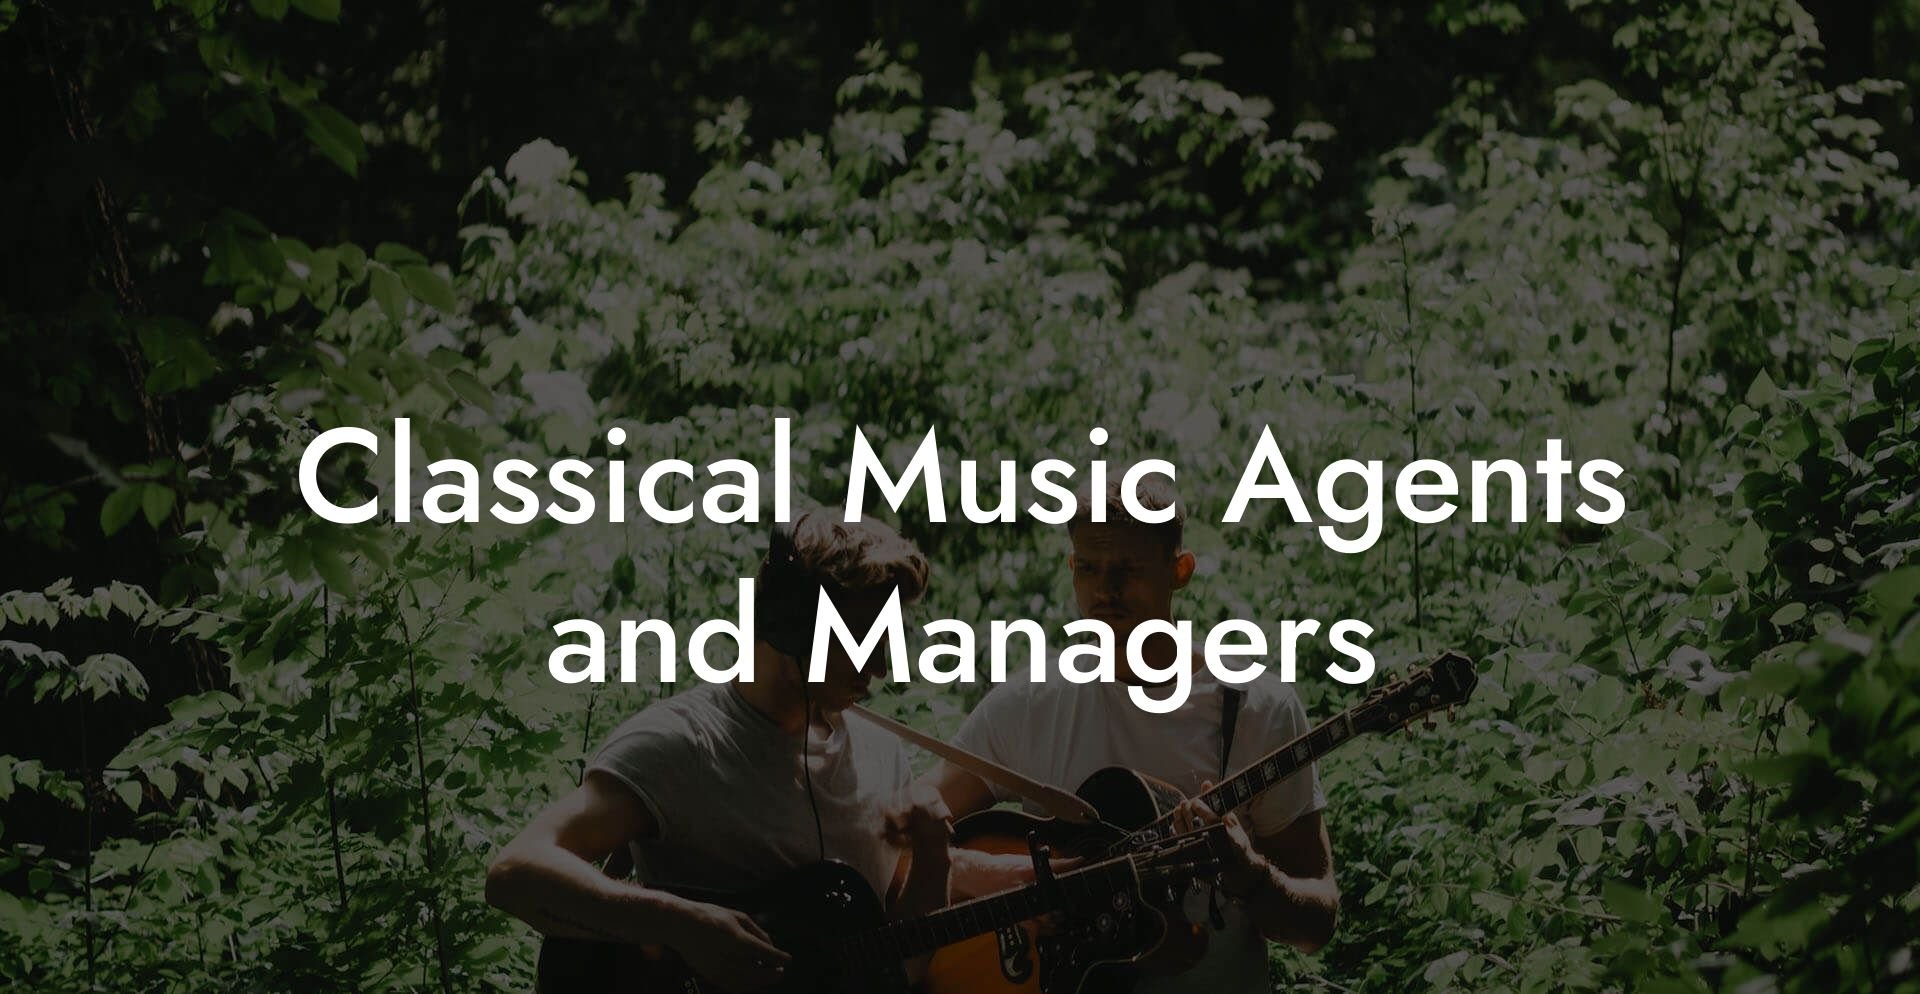 Classical Music Agents and Managers